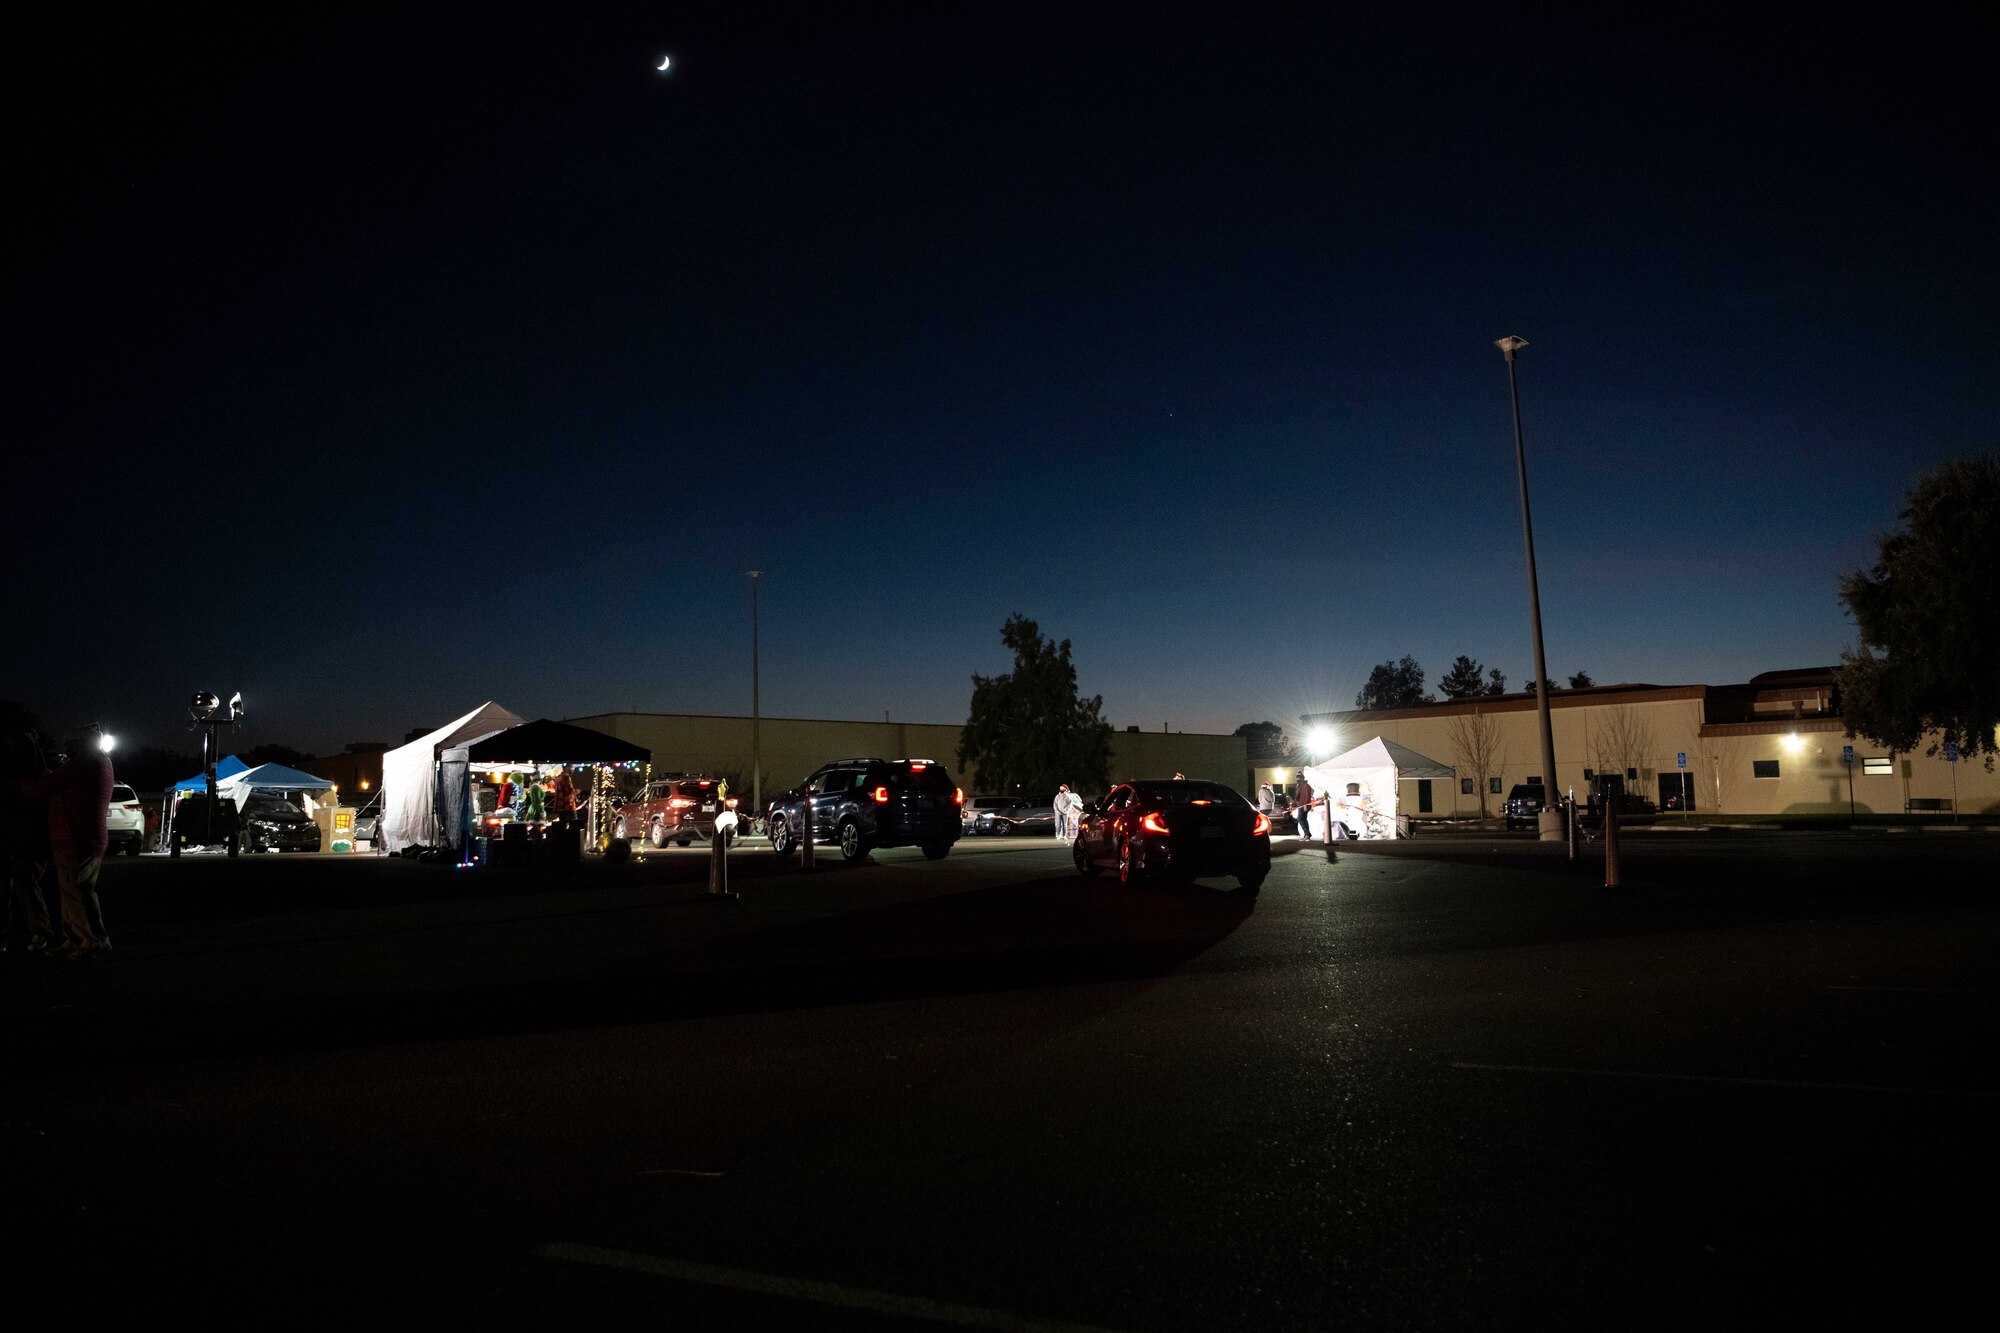 Cars line up at the Candy Cane Lane drive-thru Dec. 18, 2020, at Travis Air Force Base, California. During the event, volunteers distributed 260 gift bags to Airmen and their families. (U.S. Air Force photo by Airman 1st Class Alexander Merchak)